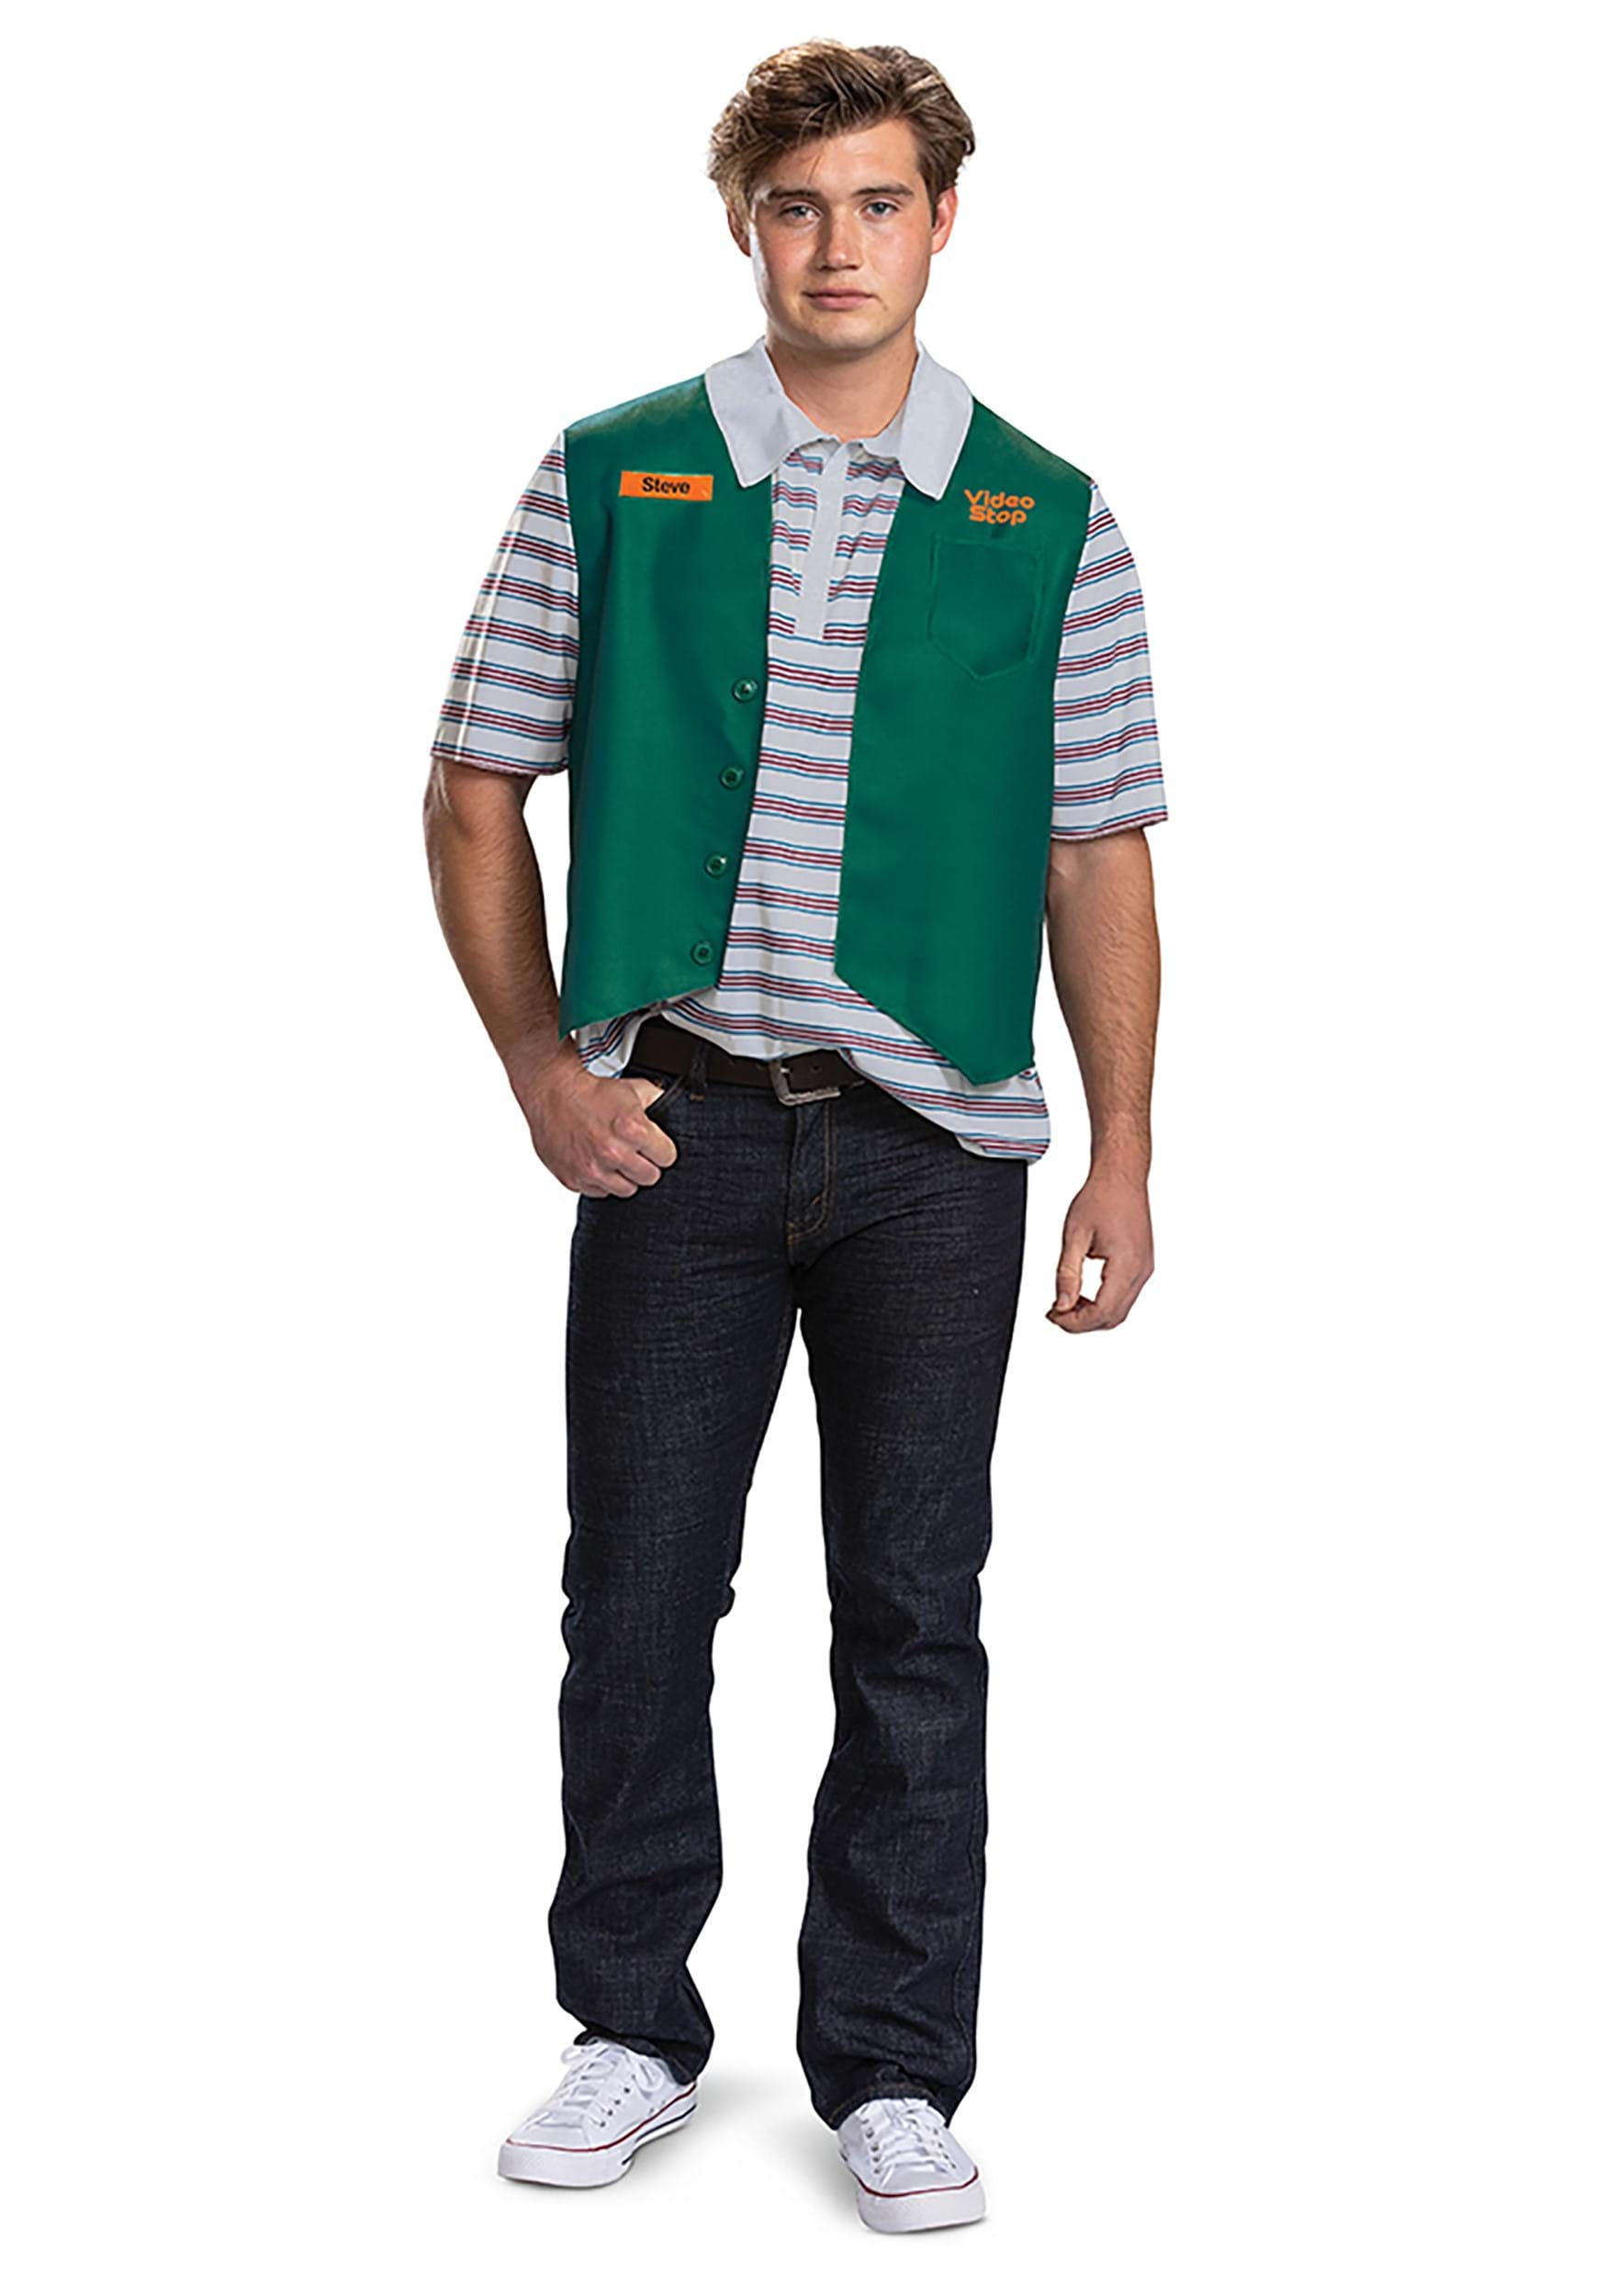 Stranger Things Deluxe Video Stop Steve Costume for Adults